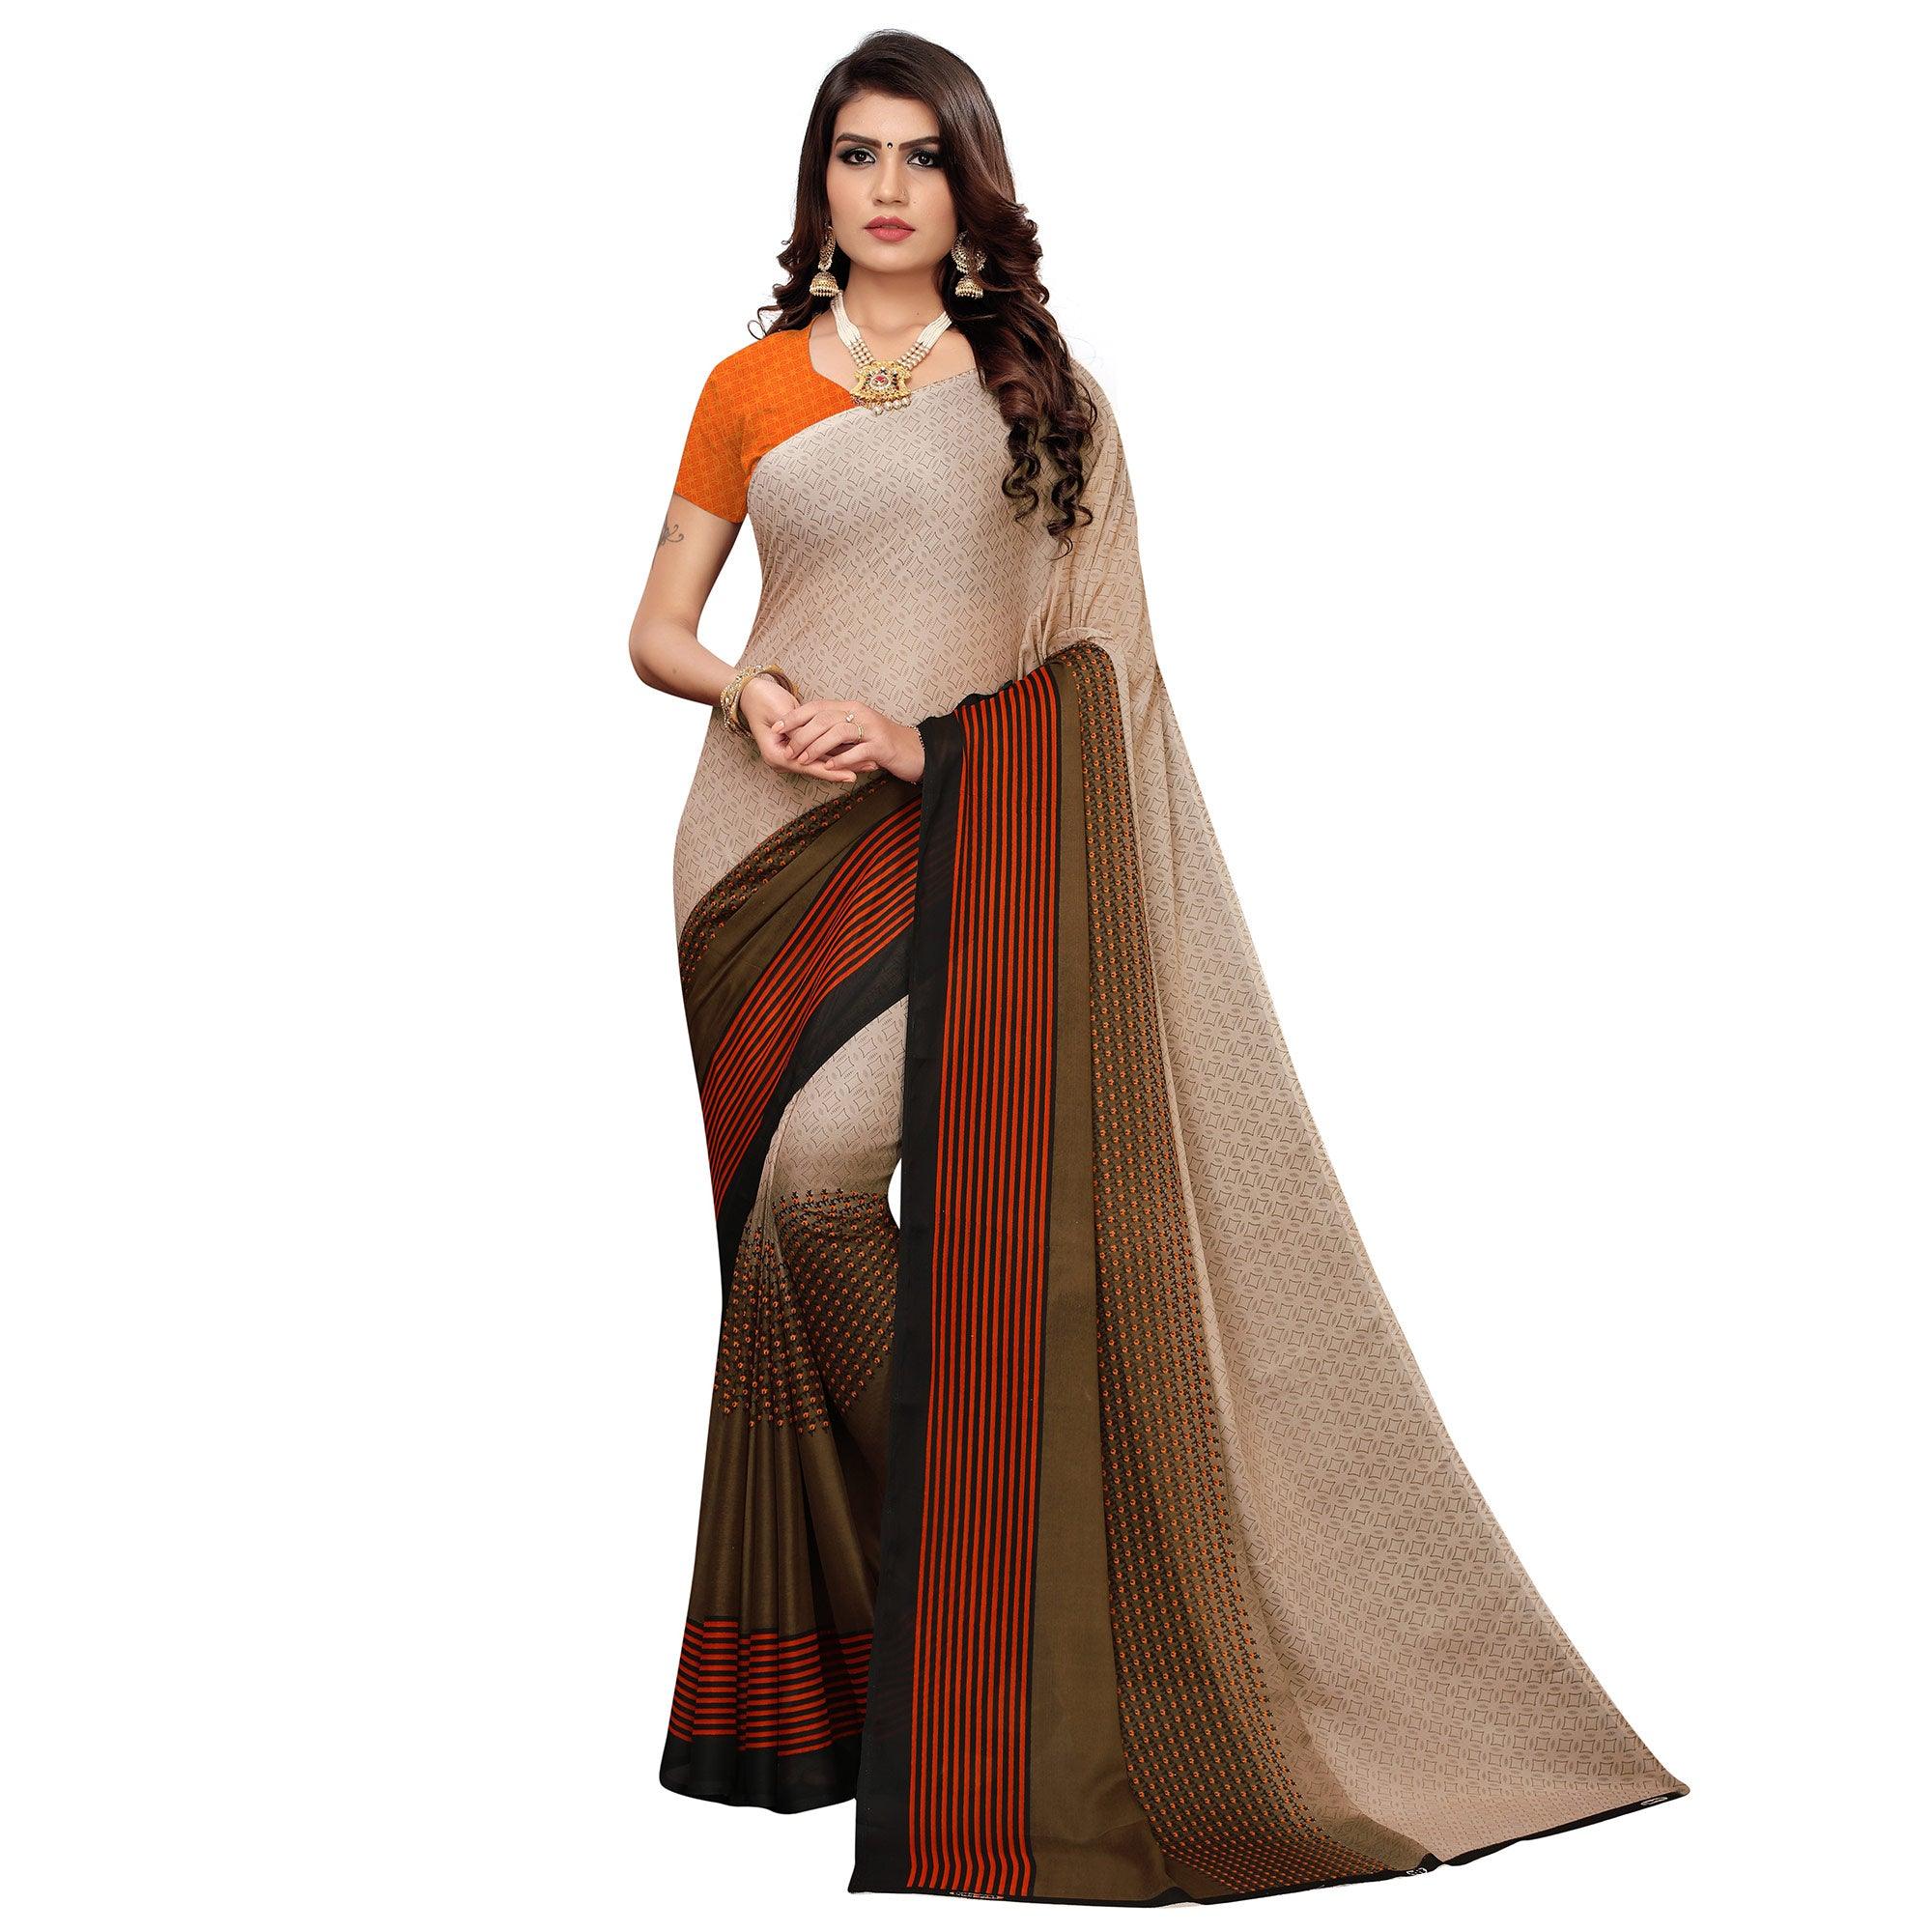 Captivating Brown Colored Casual Wear Printed Georgette Saree - Peachmode